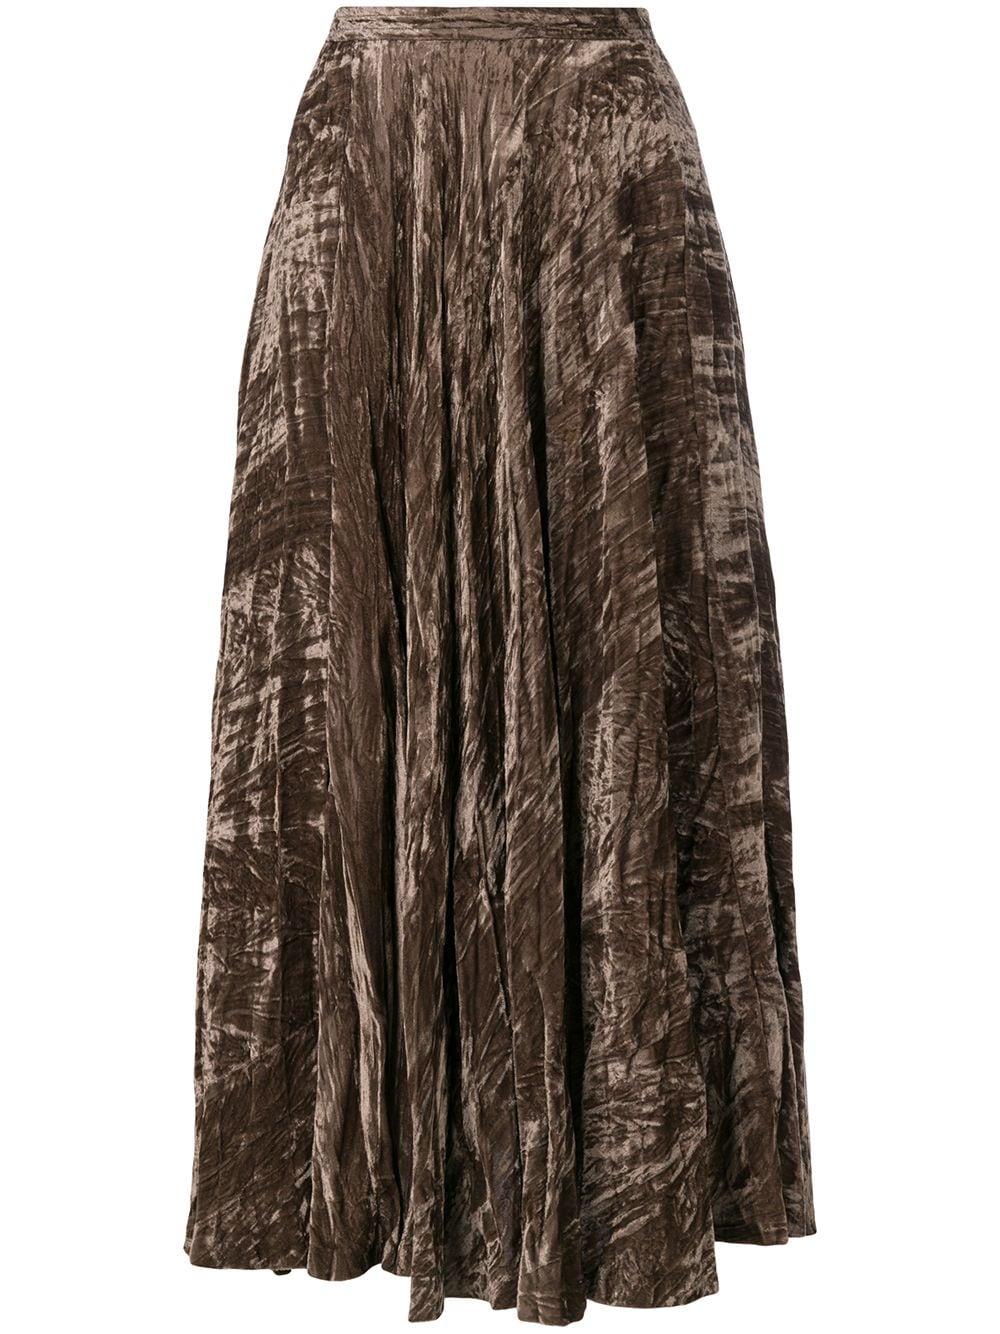 Yves Saint Laurent  taupe crushed velvet maxi skirt featuring a high waist, pleated details, a straight hem, a mid-calf length and no lining. 
100% viscose  
Estimated size 36fr/ US4/ UK8
In good vintage condition. 
Made in France. 
We guarantee you